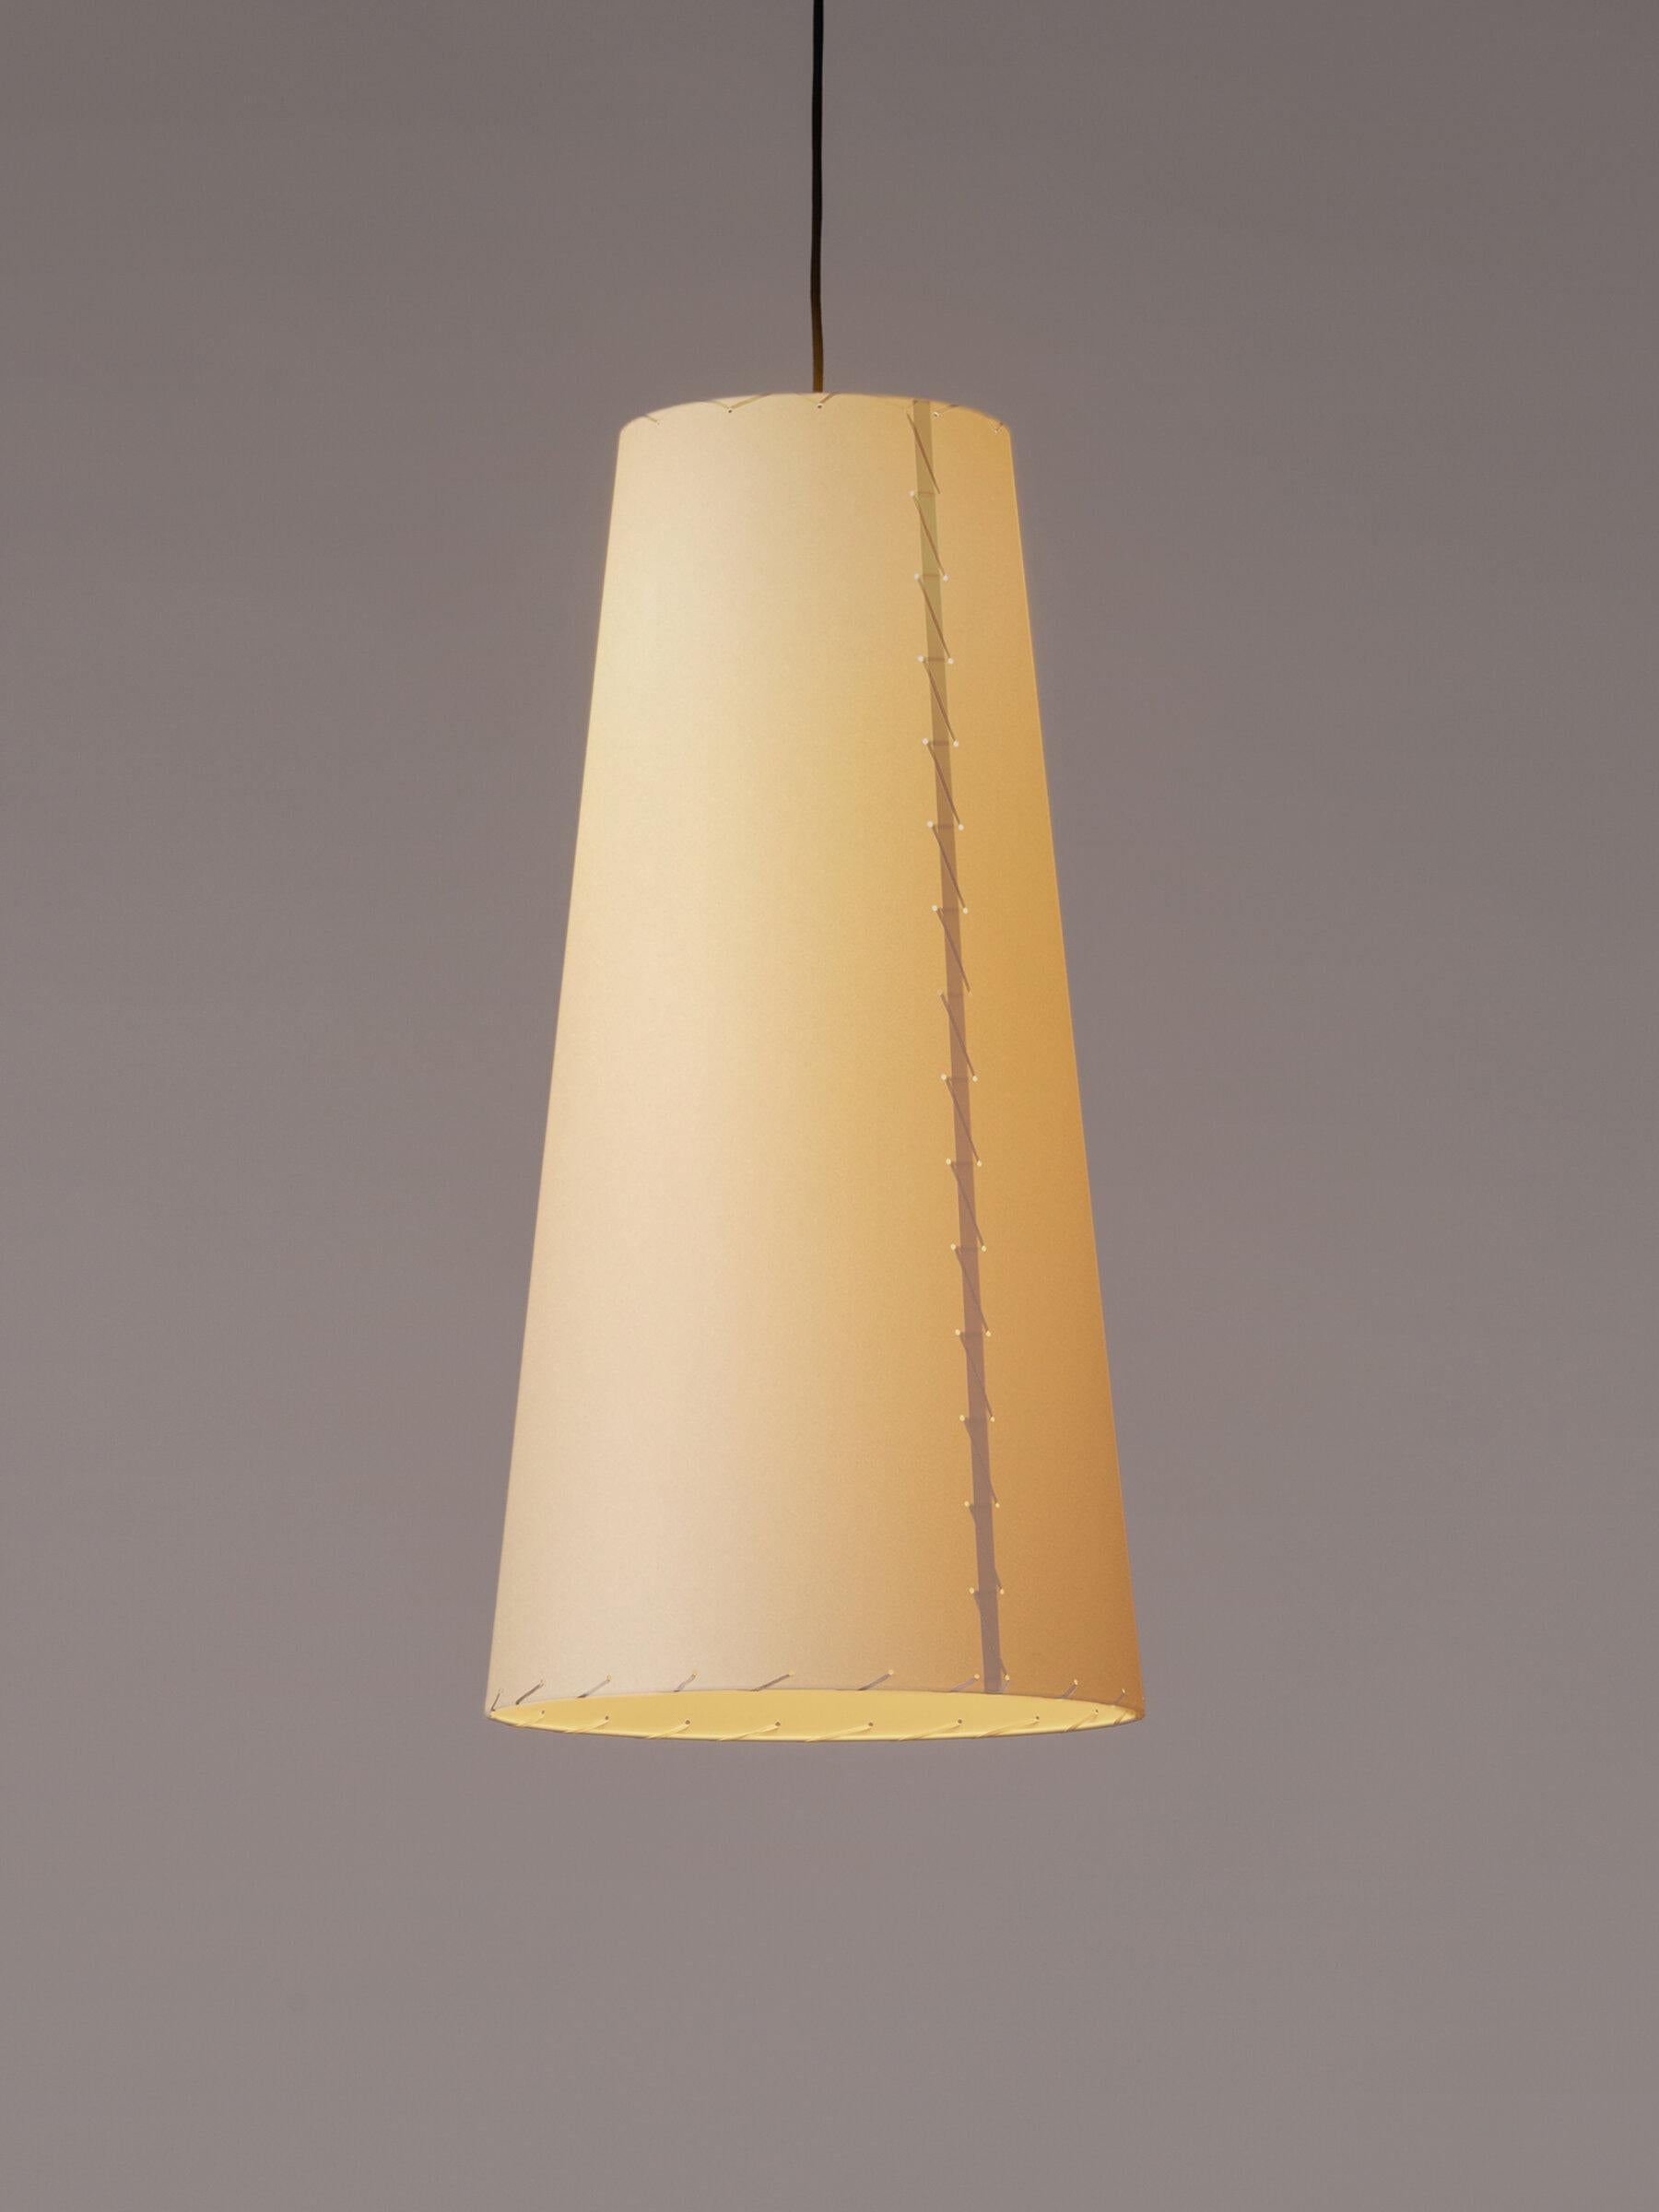 Sísísí Cónicas Largas GT4 pendant lamp by Gabriel Ordeig Cole
Dimensions: D 40 x H 80 cm
Materials: metal, stitched parchment.

The GT4 and MT2 lamps consist of a conical shade made of stitched cardboard, to be repeated in spaces where a warm